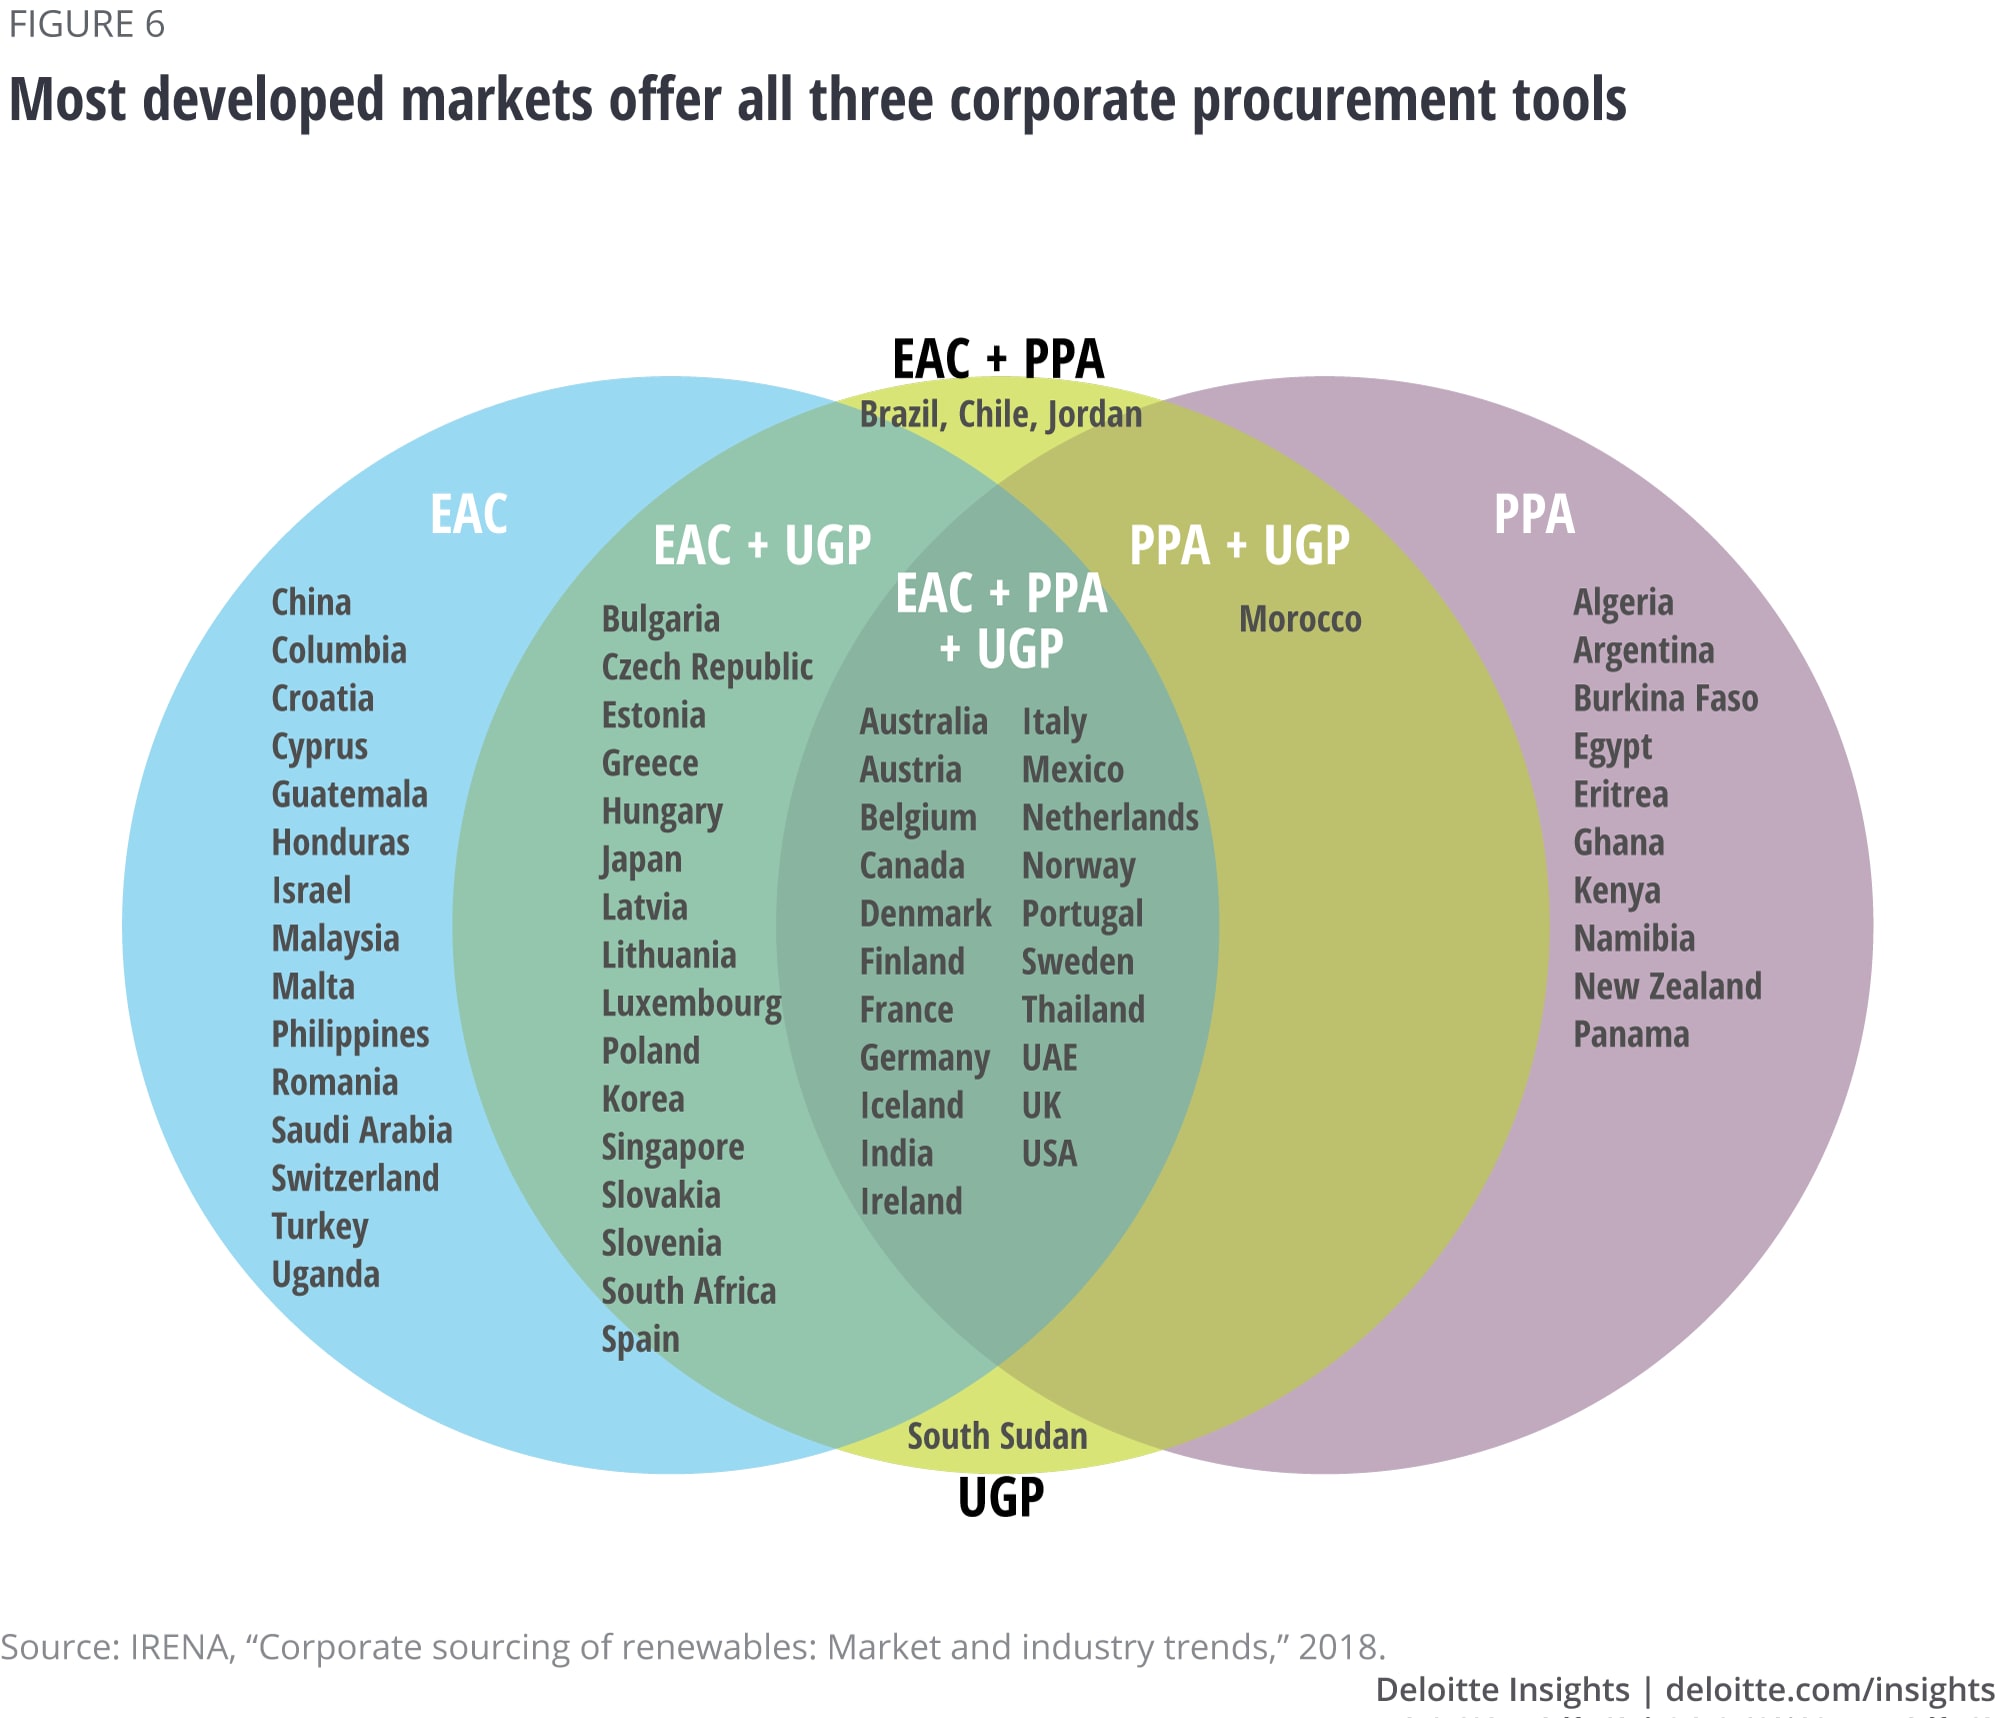 Most developed markets offer all three corporate procurement tools